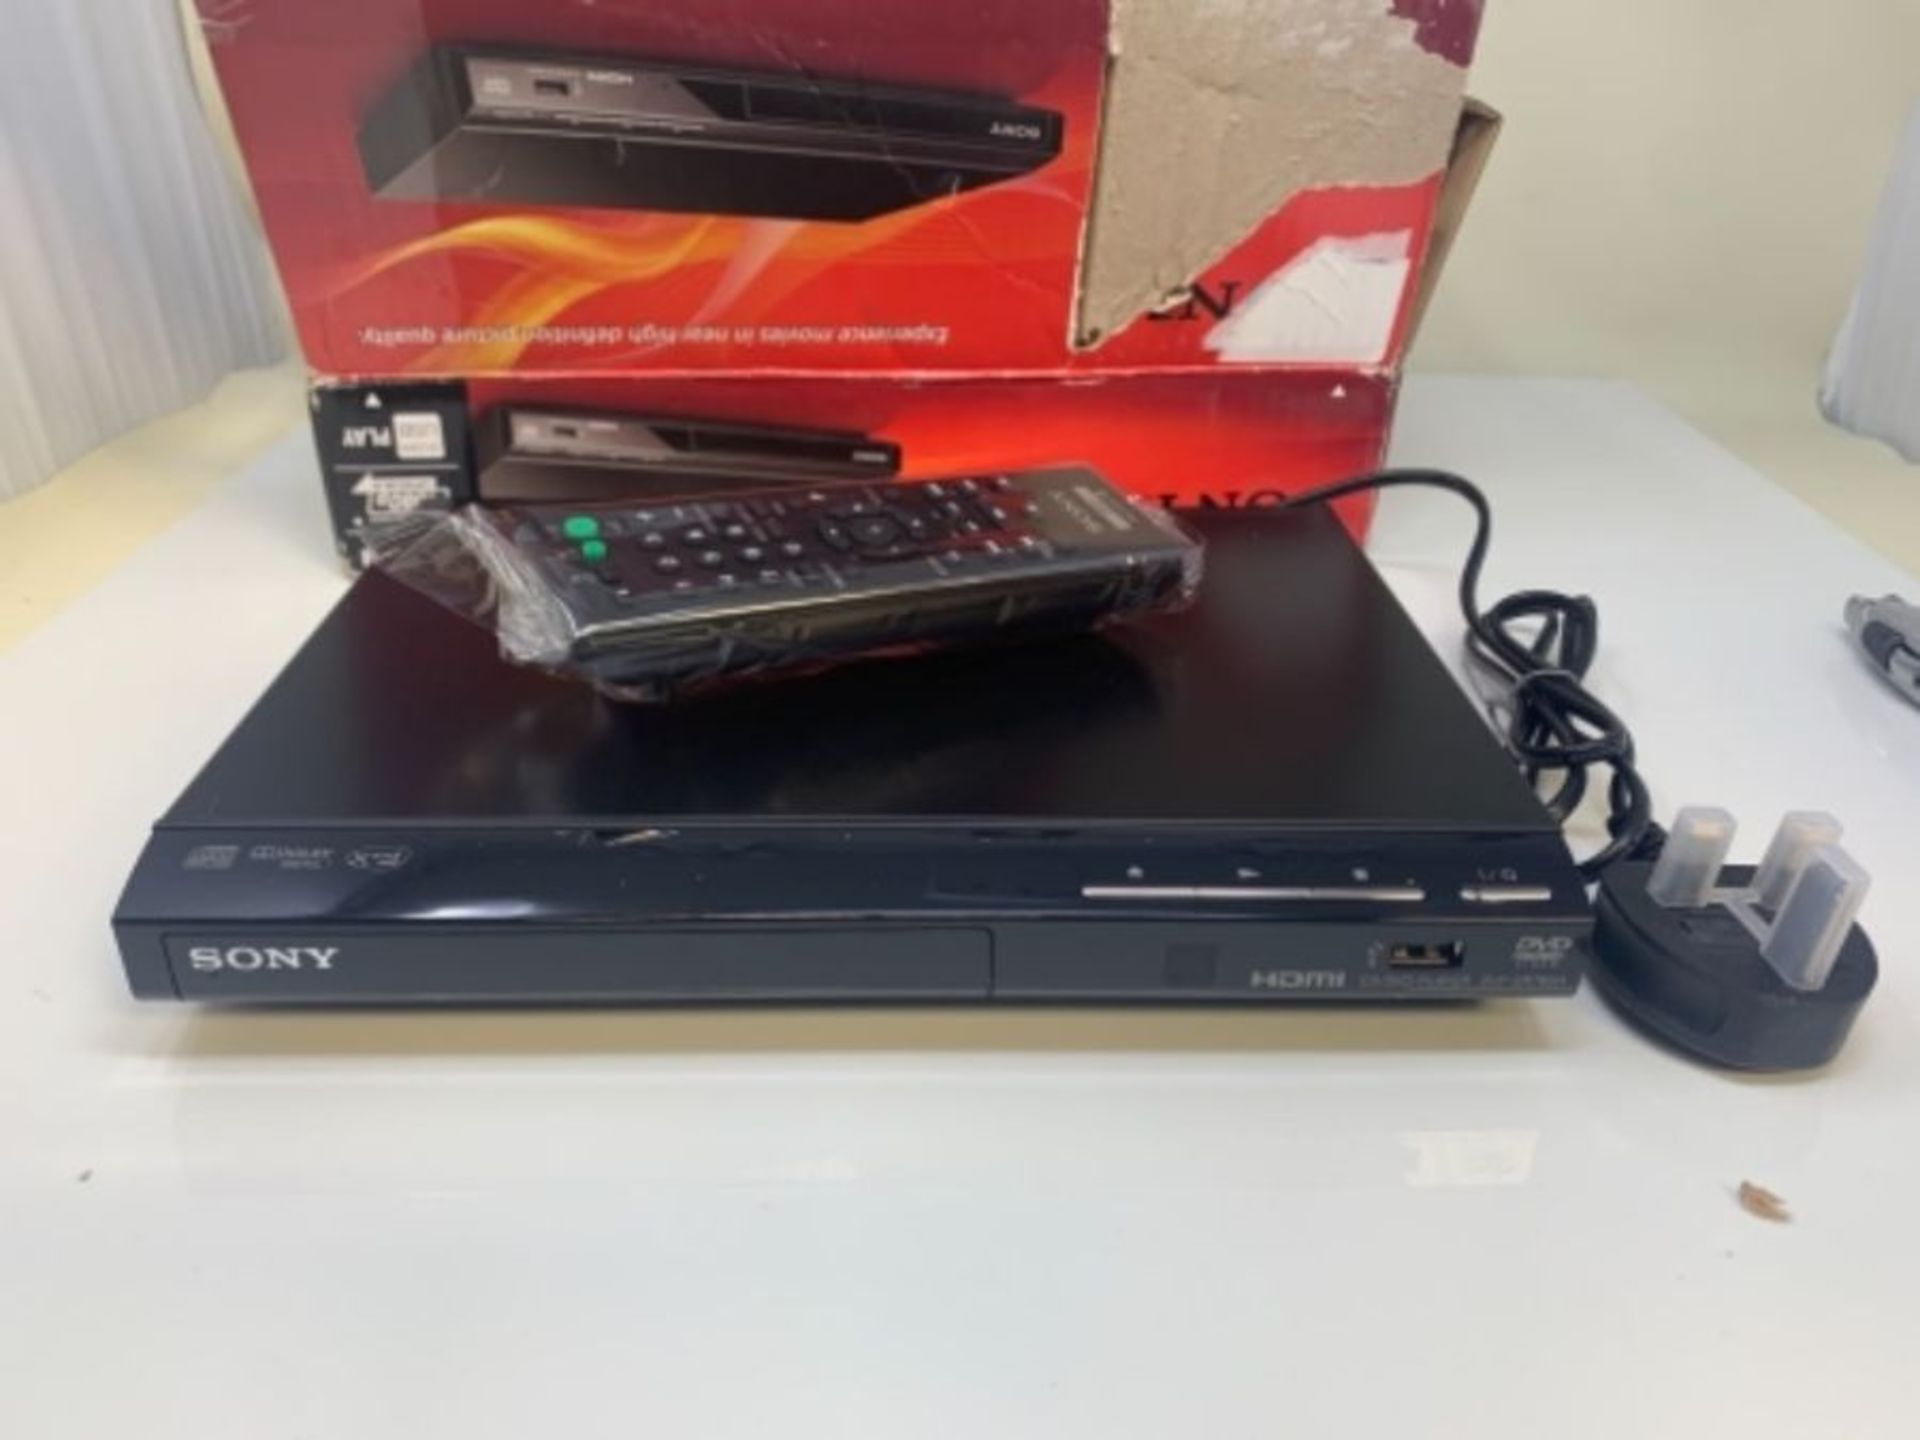 Sony DVPSR760H DVD Upgrade Player (HDMI, 1080 Pixel Upscaling, USB Connectivity), Blac - Image 3 of 3